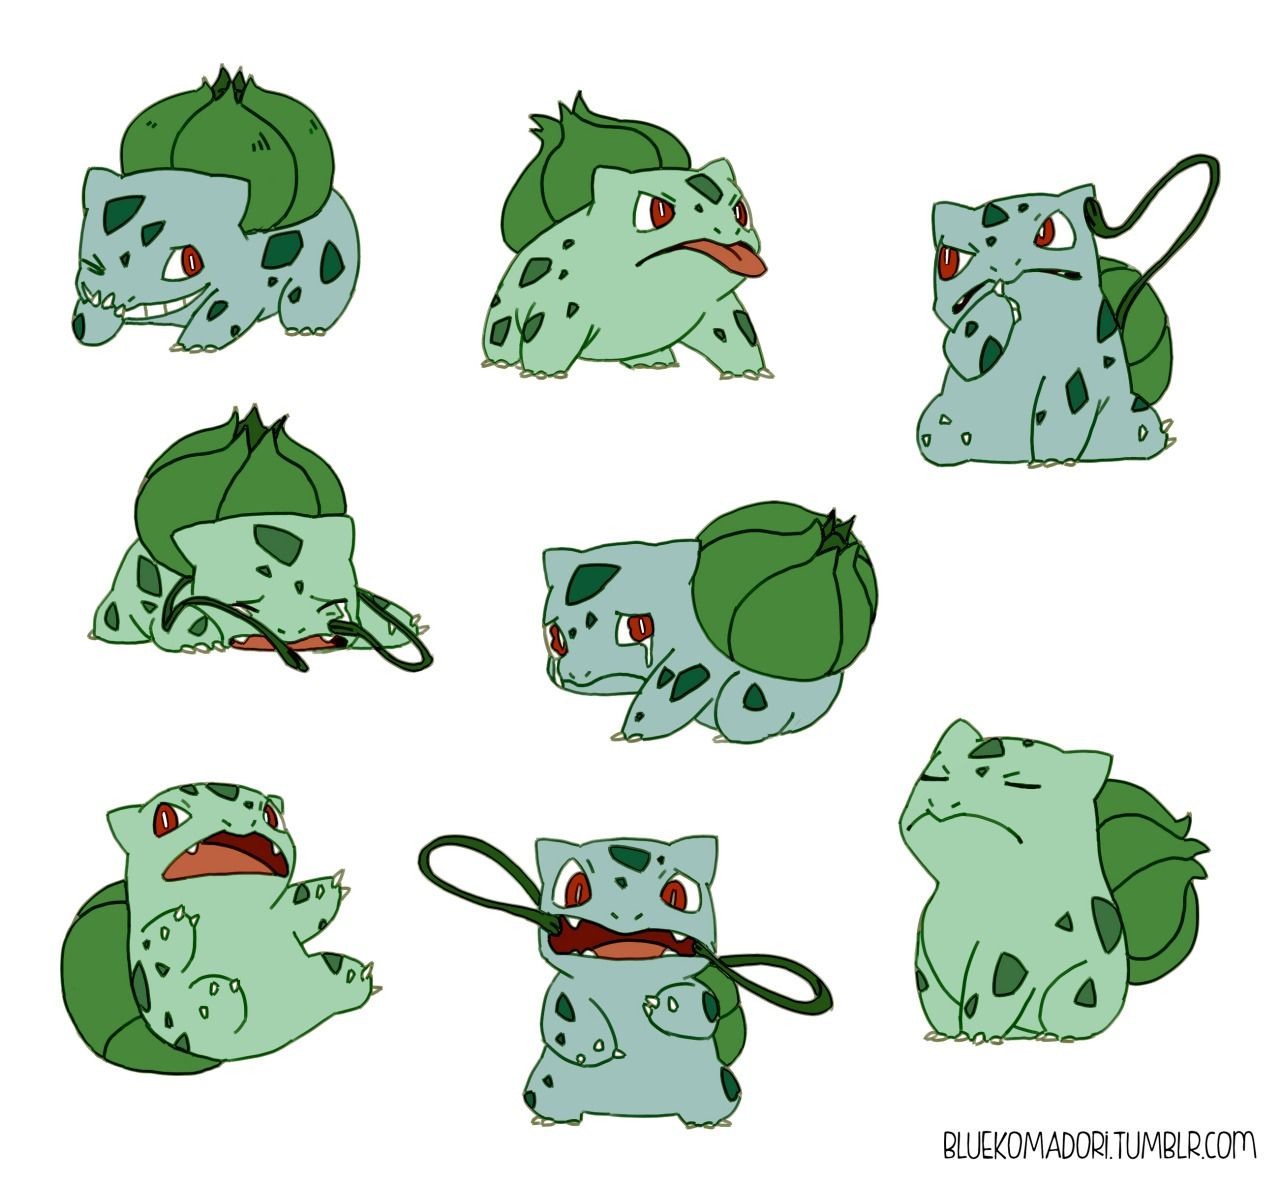 Bulbasaur Papercraft Op A Mission Of Bulbasaur & Its Evolutions for Carlos Araujo